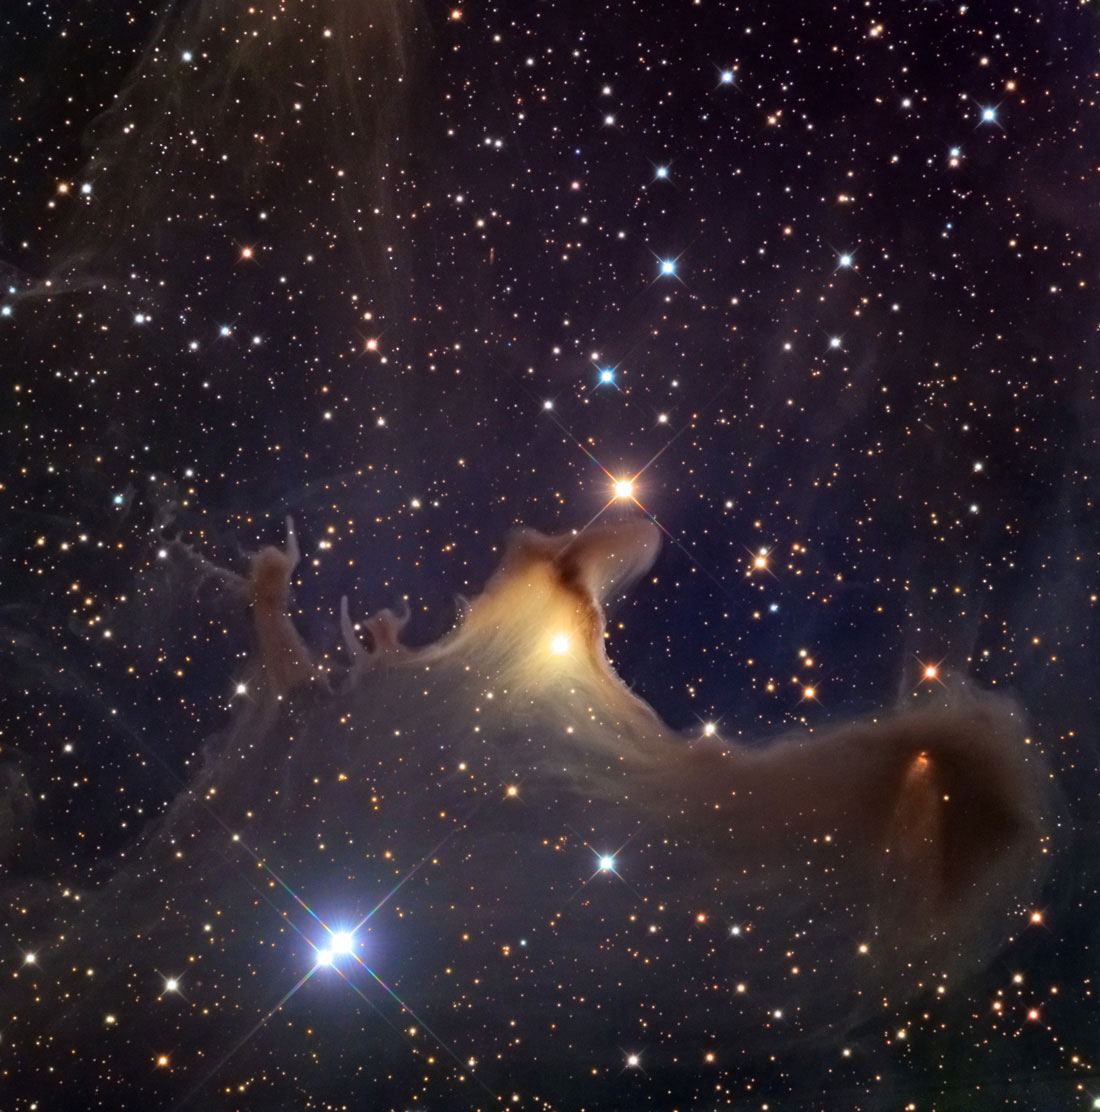 SH2-136 The Ghosts of CepheusThe Ghosts of Cepheus present a cosmic view with the chiaroscuro that the oldgreat painters might have applied to their canvases. Here a few bright starsilluminate an otherwise dark and cold molecular cloud of gas and dust some1,200 light years away. Their ghoulish and scalloped shapes are as surprisingas they are rare in other similar clouds. Note the conical outflows on theright side of the cloud where a star is forming and blowing dust from deepwithin.Summer 2011